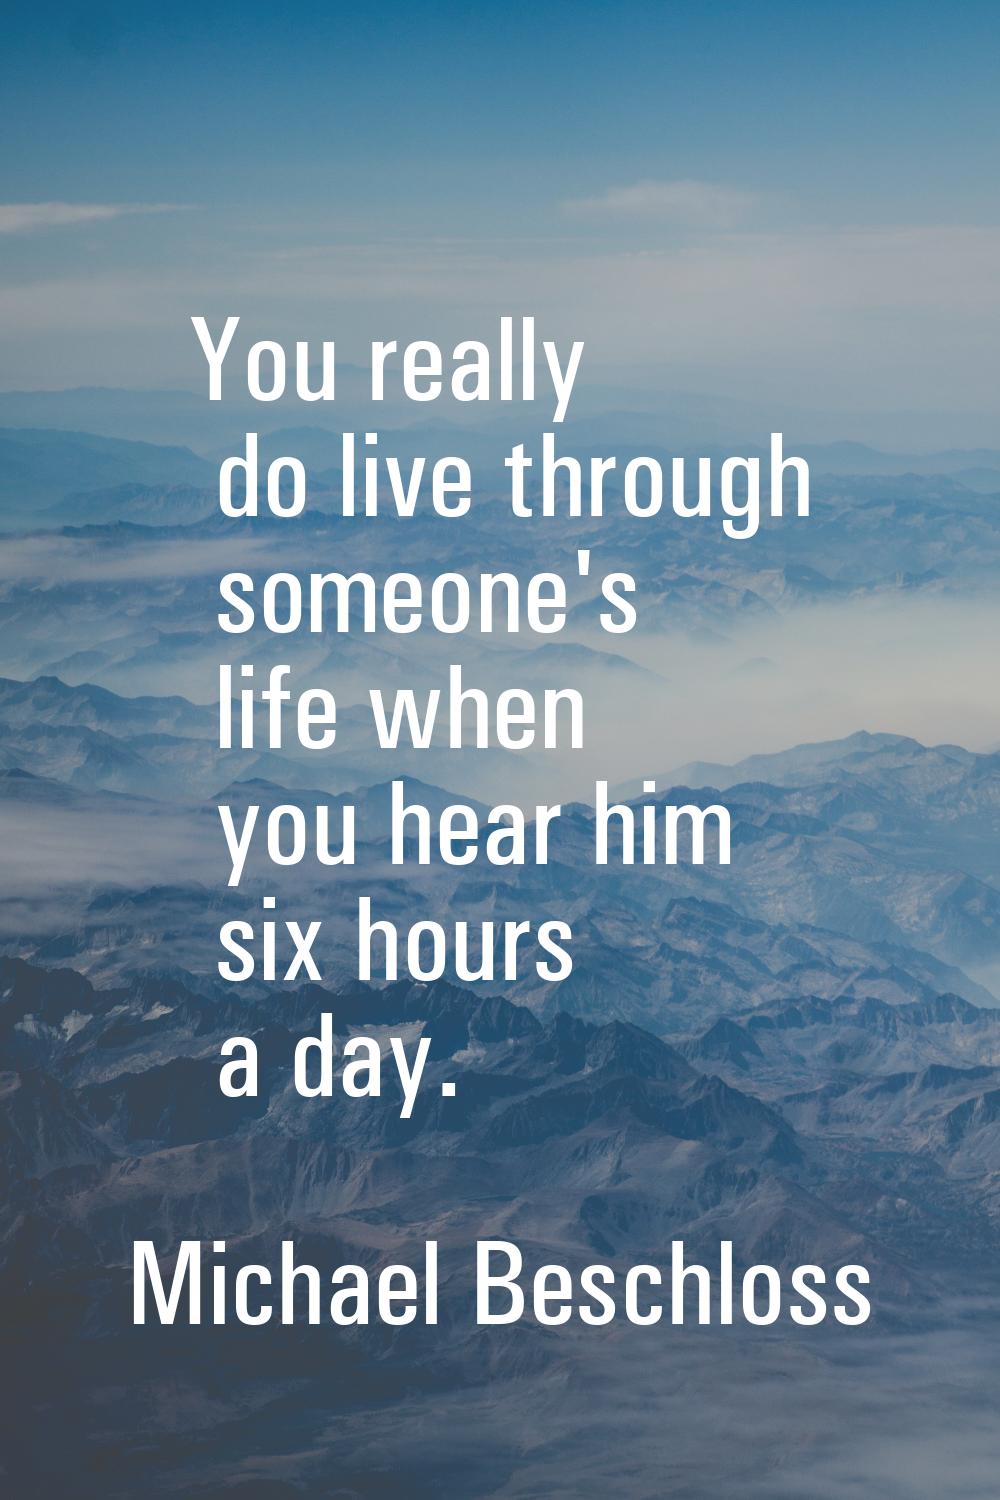 You really do live through someone's life when you hear him six hours a day.